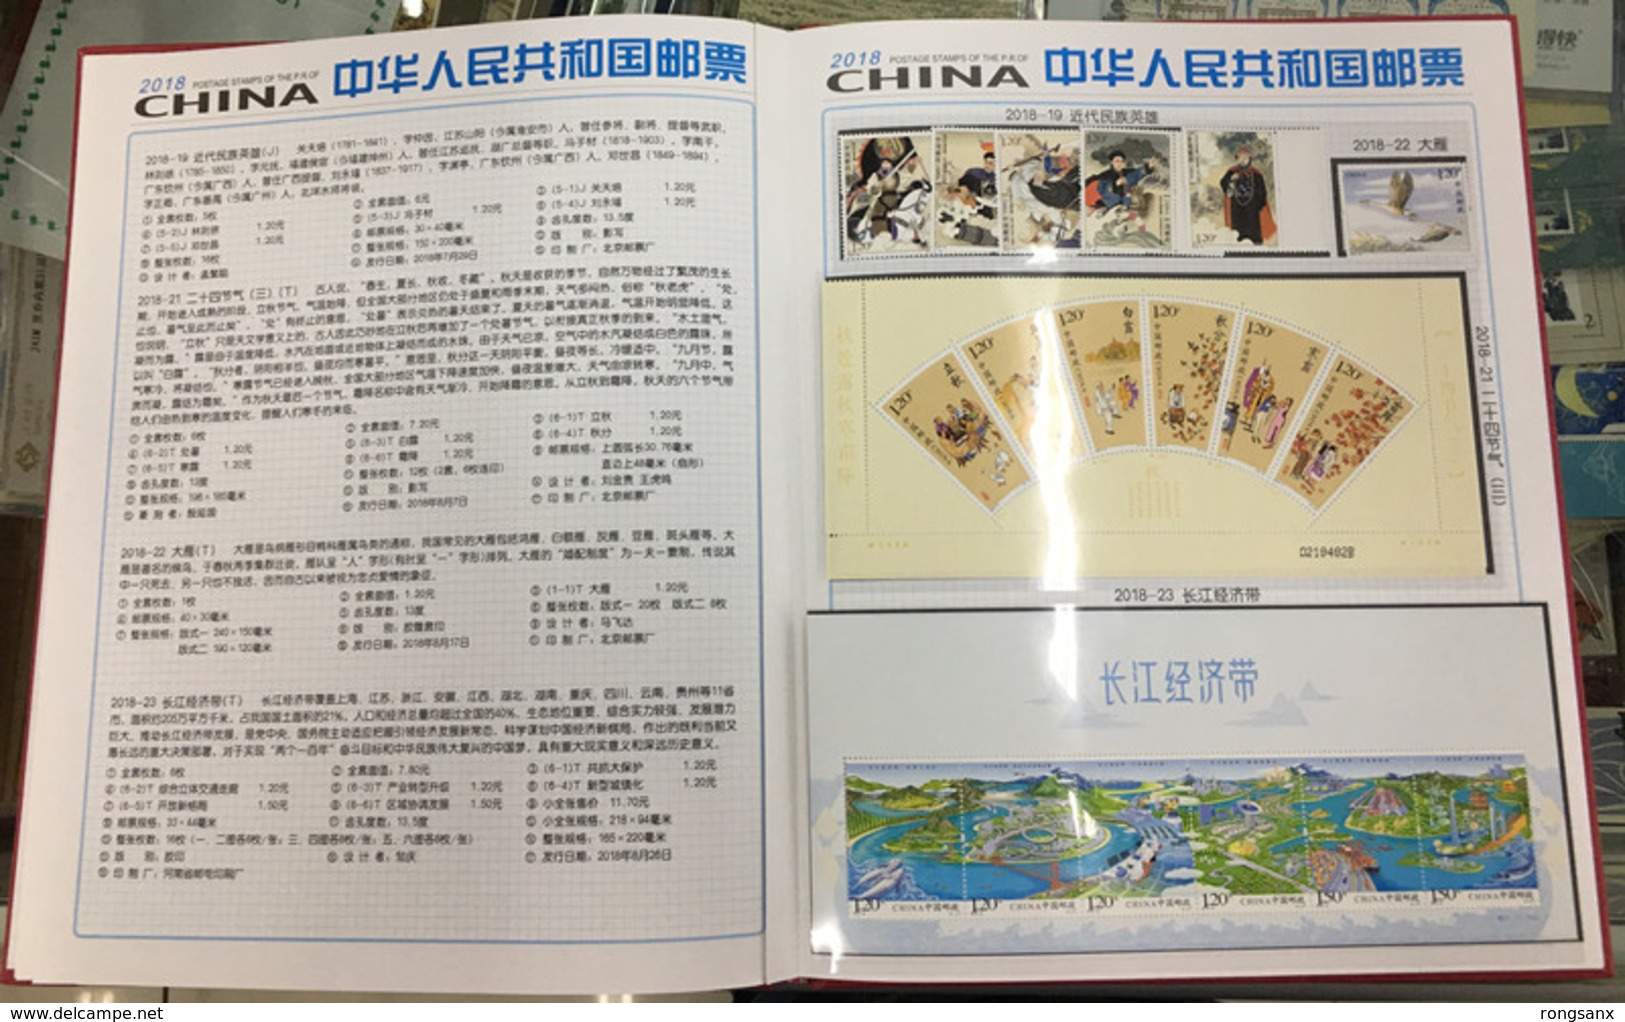 China 2018 YEAR PACK INCLUDE STAMP+MS SEE PIC with album